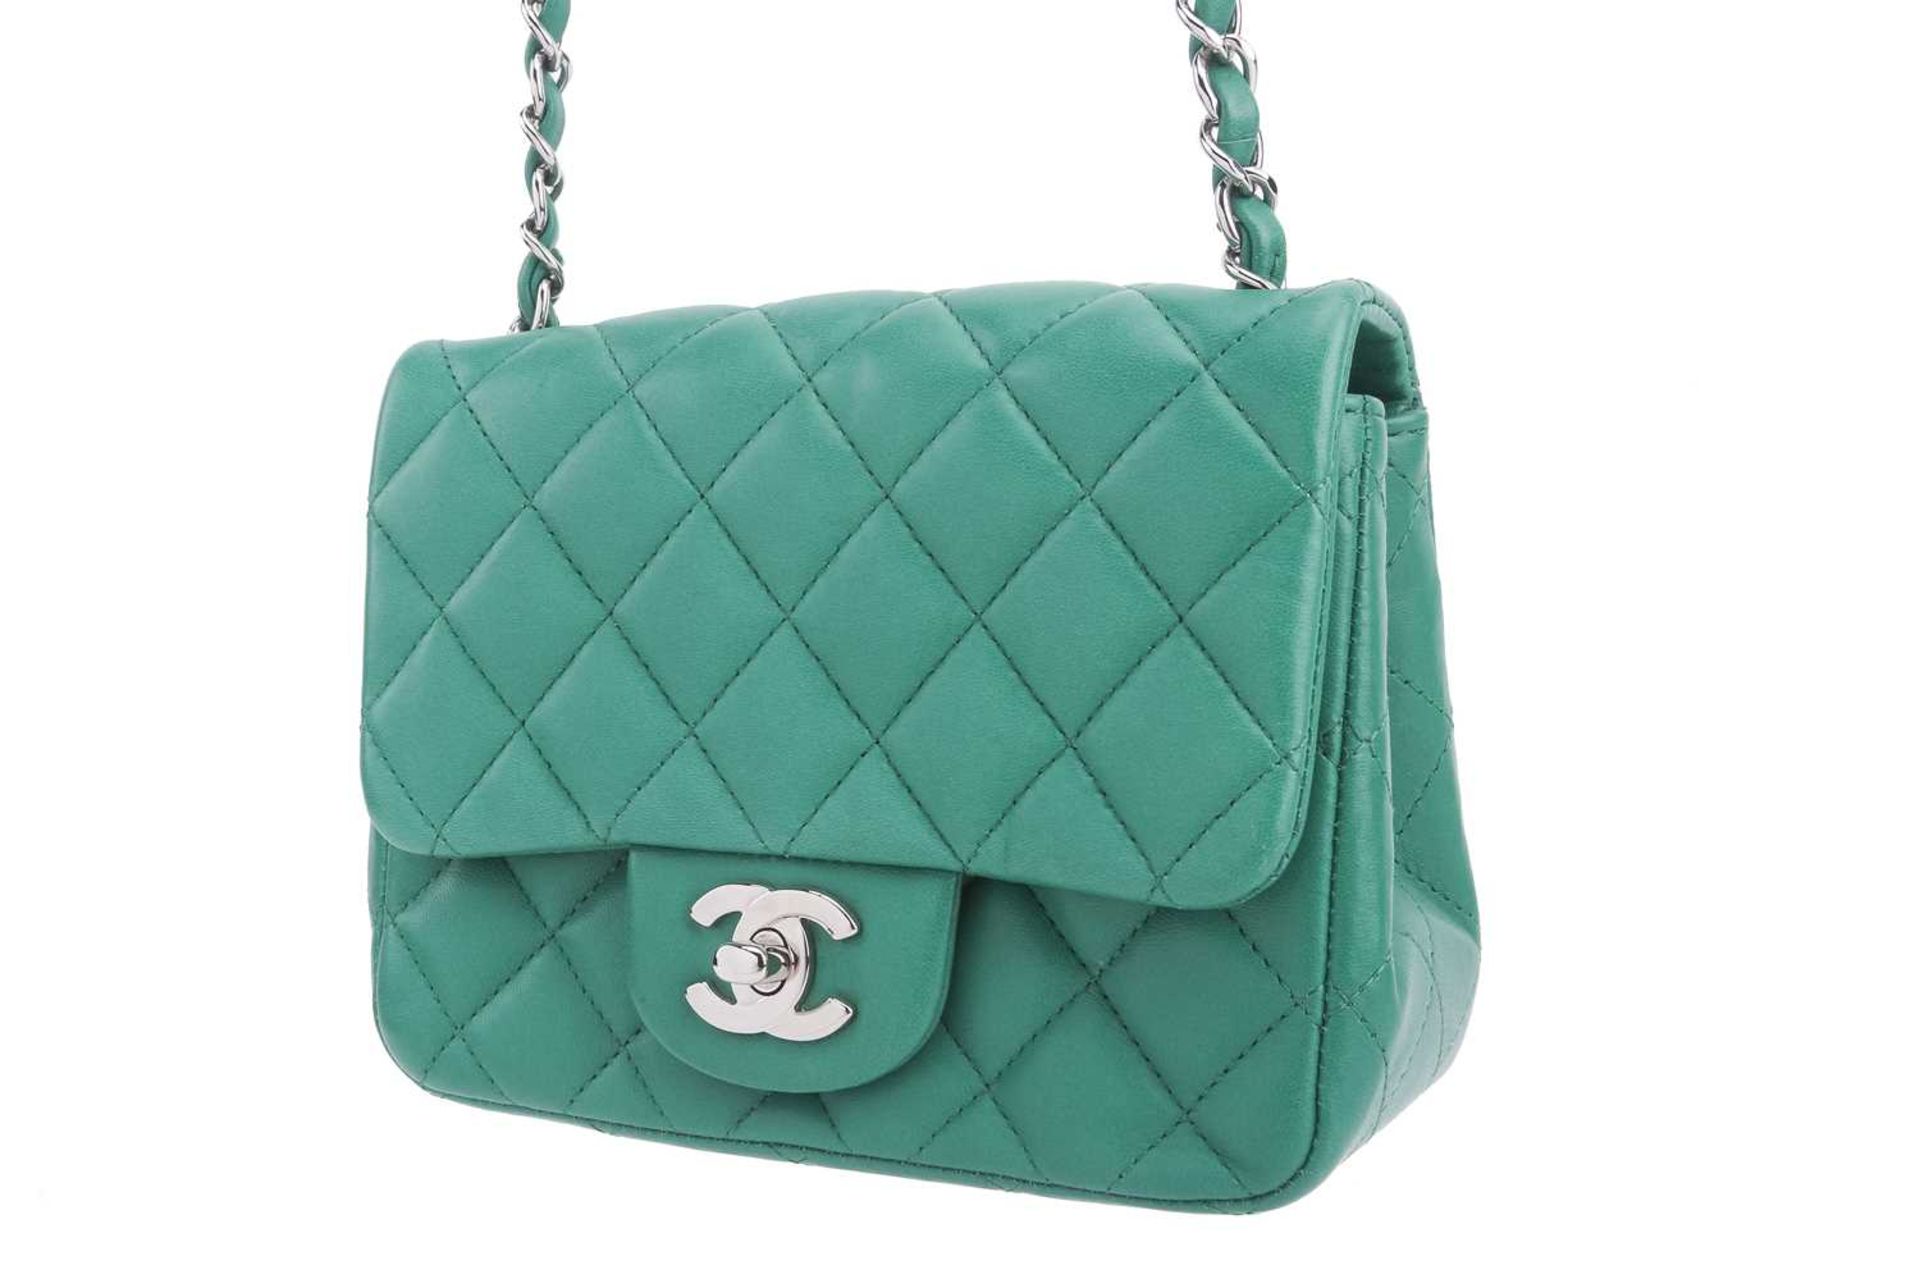 Chanel - a mini flap bag in green diamond-quilted lambskin leather, circa 2016, square body with - Image 12 of 12